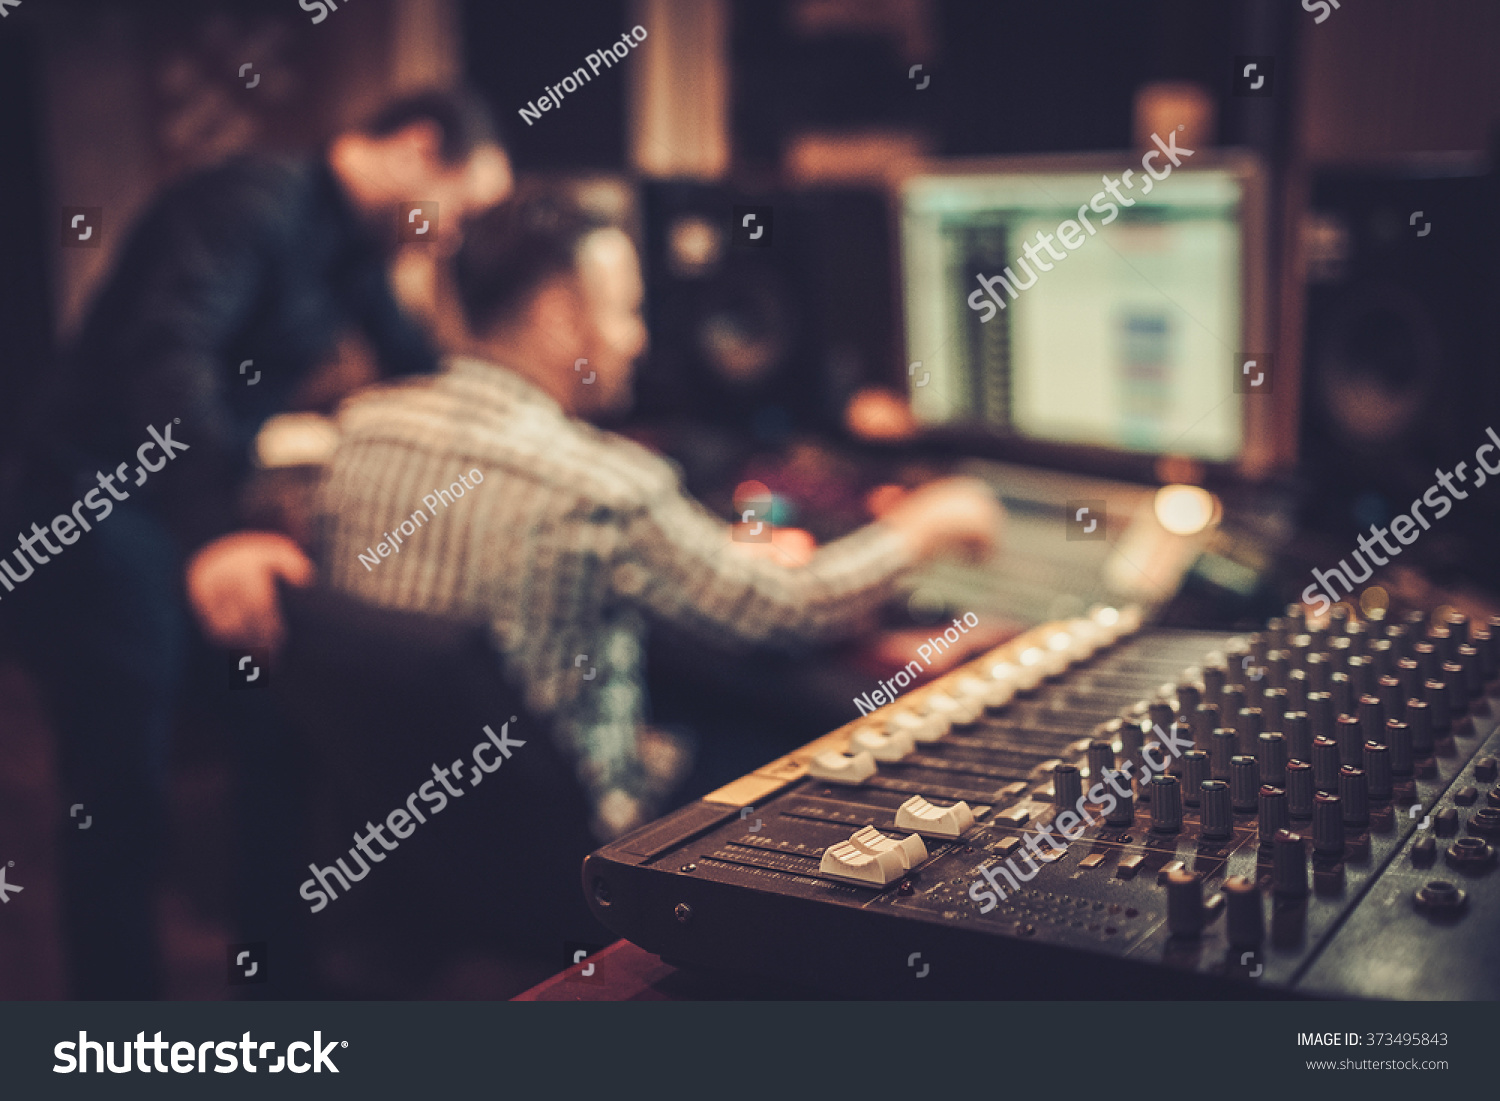 Sound engineer and producer working together at mixing panel in the boutique recording studio. #373495843